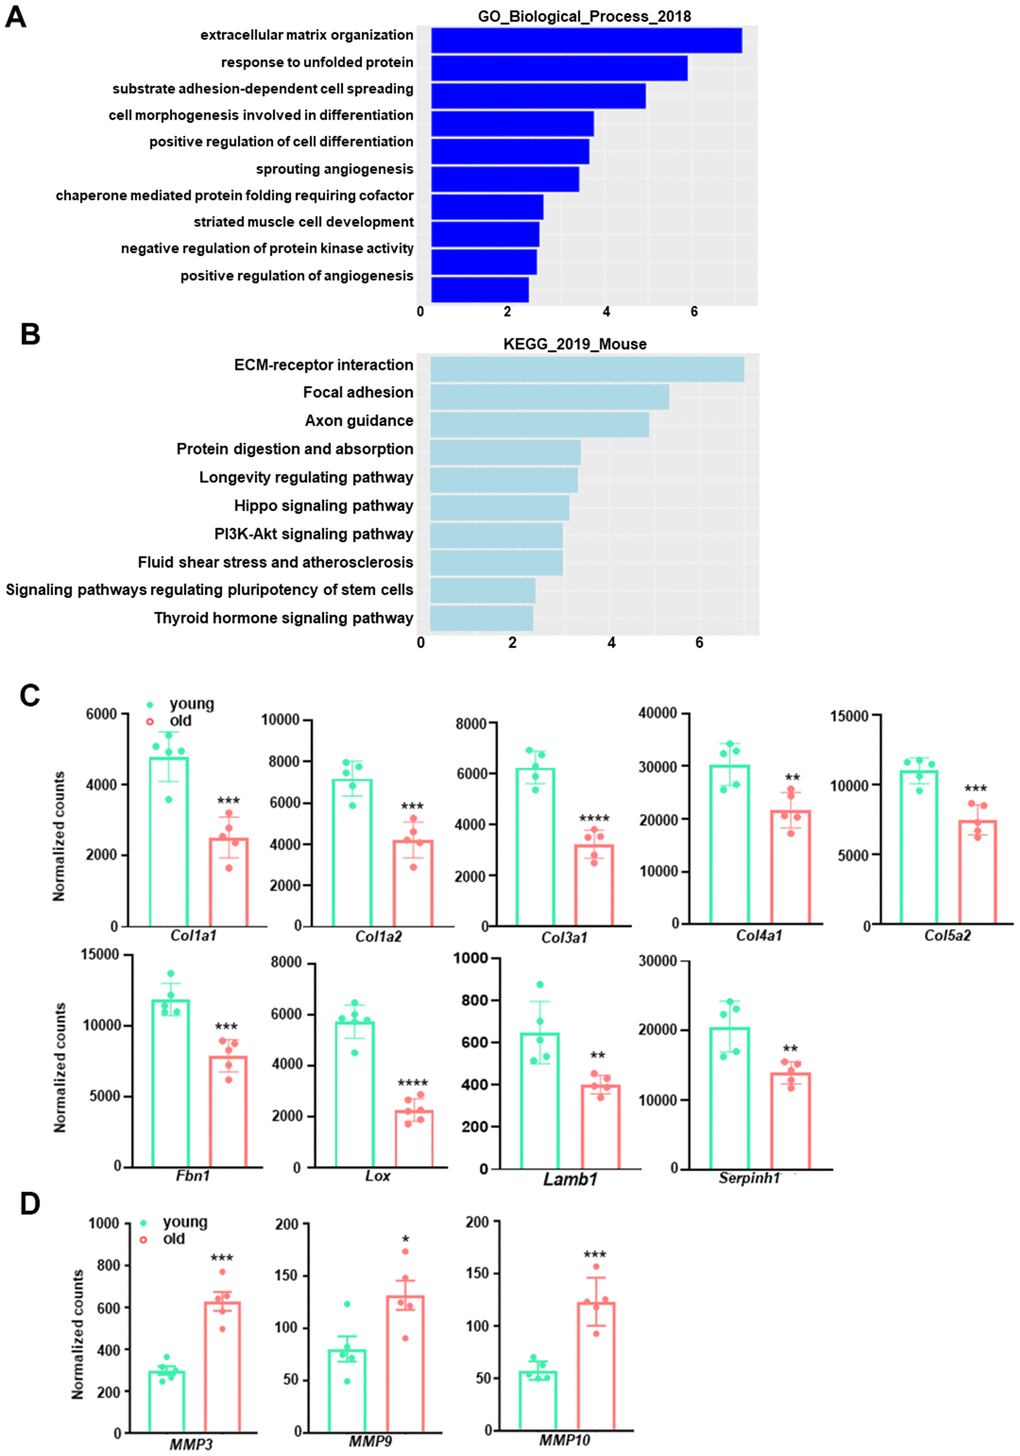 GO term enrichment and KEGG pathway analysis for downregulated transcripts in young and old mouse aortae. (A) The top 10 enriched GO biological process terms in the transcripts downregulated in old mouse aortae (adjusted p 0). Individual GO terms were sorted by adjusted p values. (B) The top 10 enriched KEGG pathways in the transcripts downregulated in old mouse aortae (adjusted p 0). Individual pathways were sorted by adjusted p values. (C, D) Normalized counts of significantly reduced genes in old aortae compared with young counterparts, including important extracellular matrix (ECM) components or regulators (C) and matrix metalloproteinases (MMPs) (D) Data are presented as a scatterplot of individual points with mean±SD, n=5. *p 